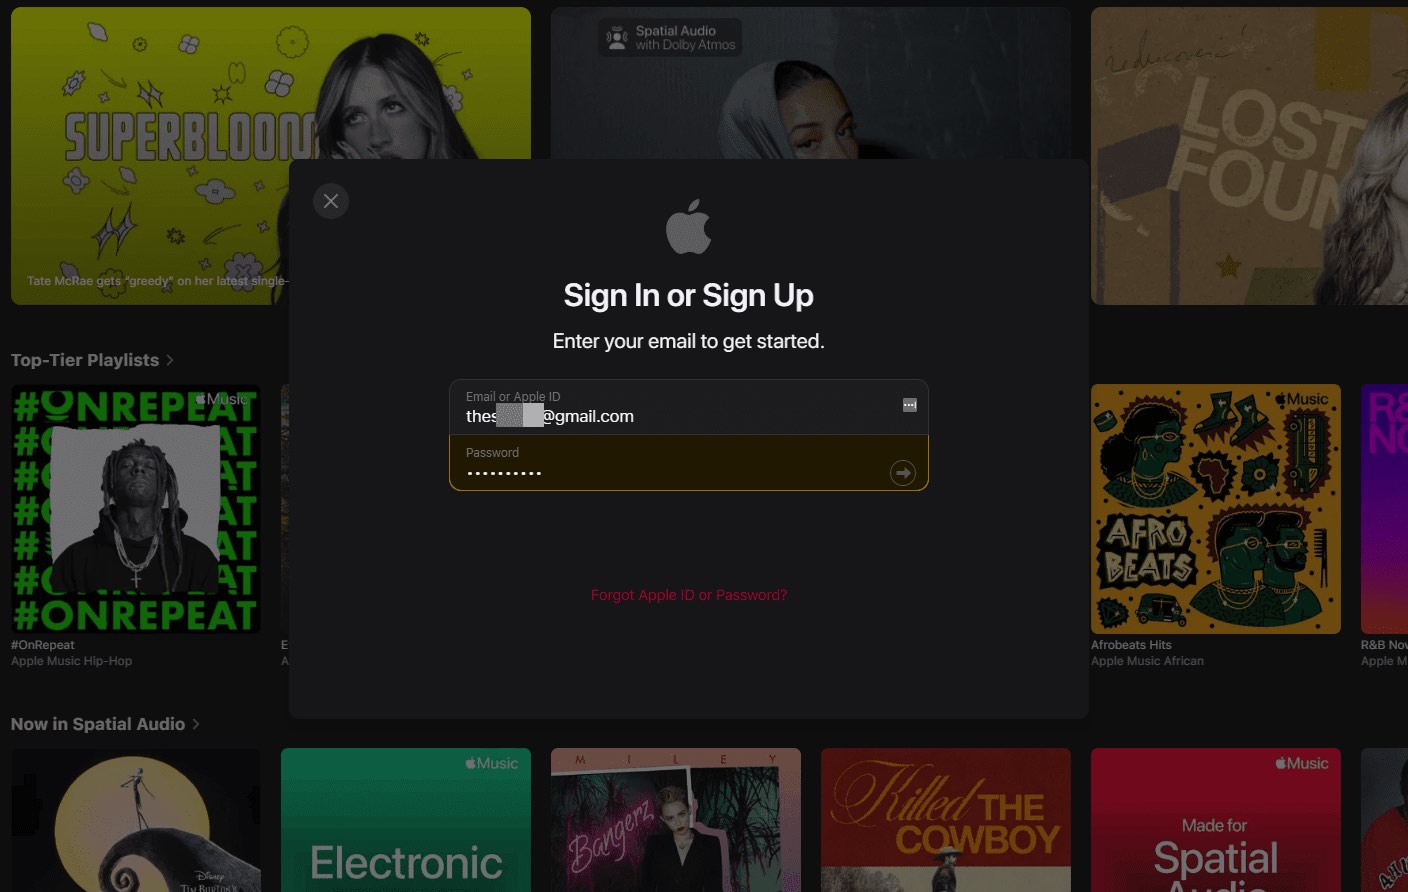 Sign in or sign up to your Apple Music account